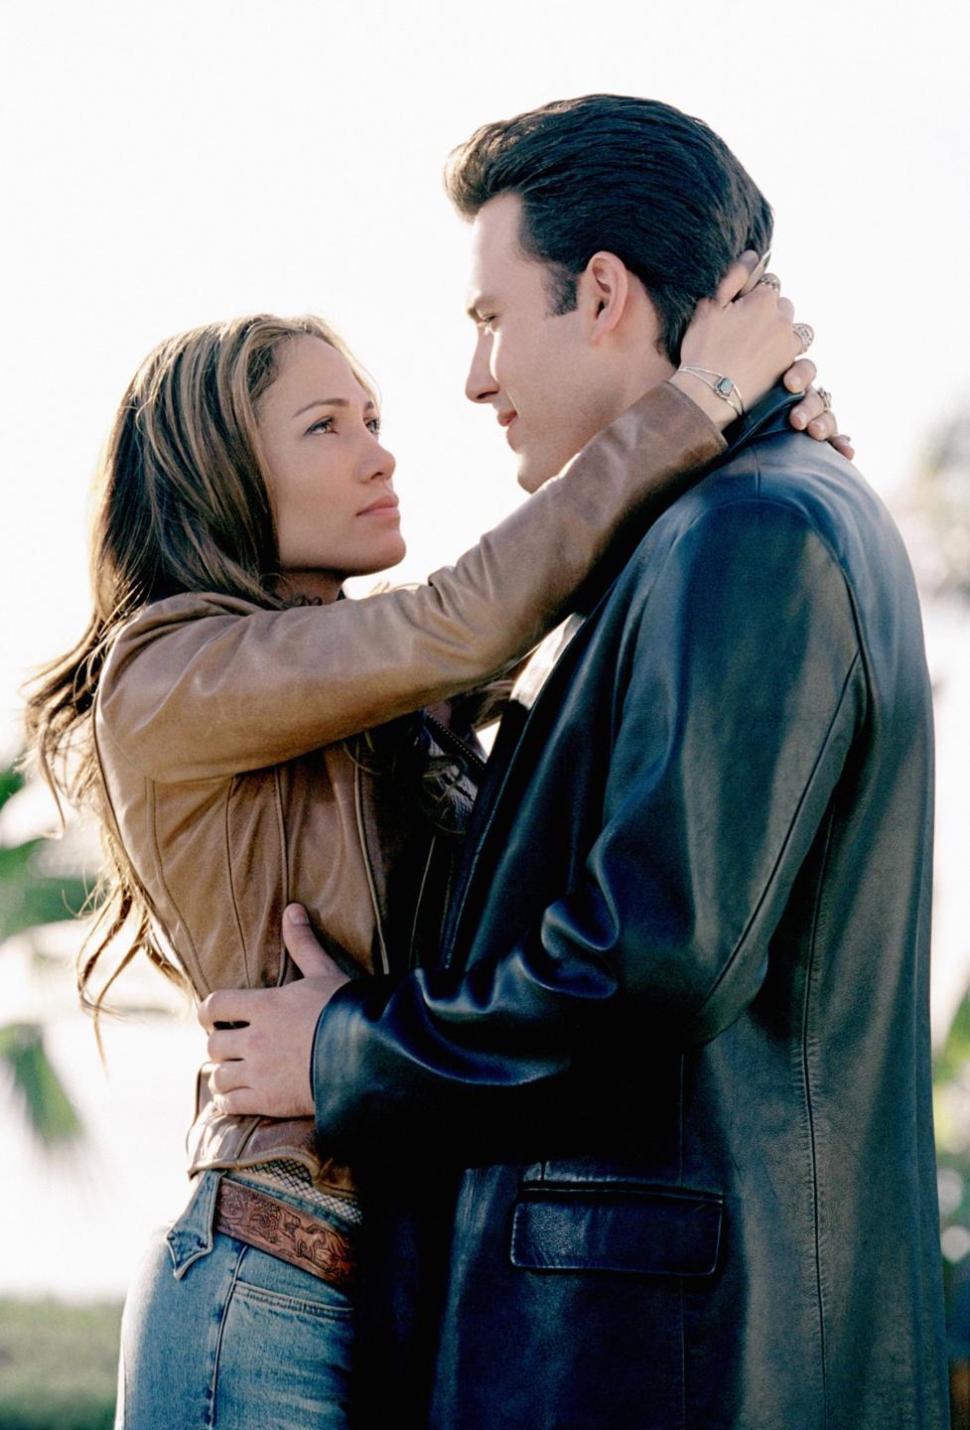 ‘Gigli’ was panned but its stars embarked on a romance hailed by the media.